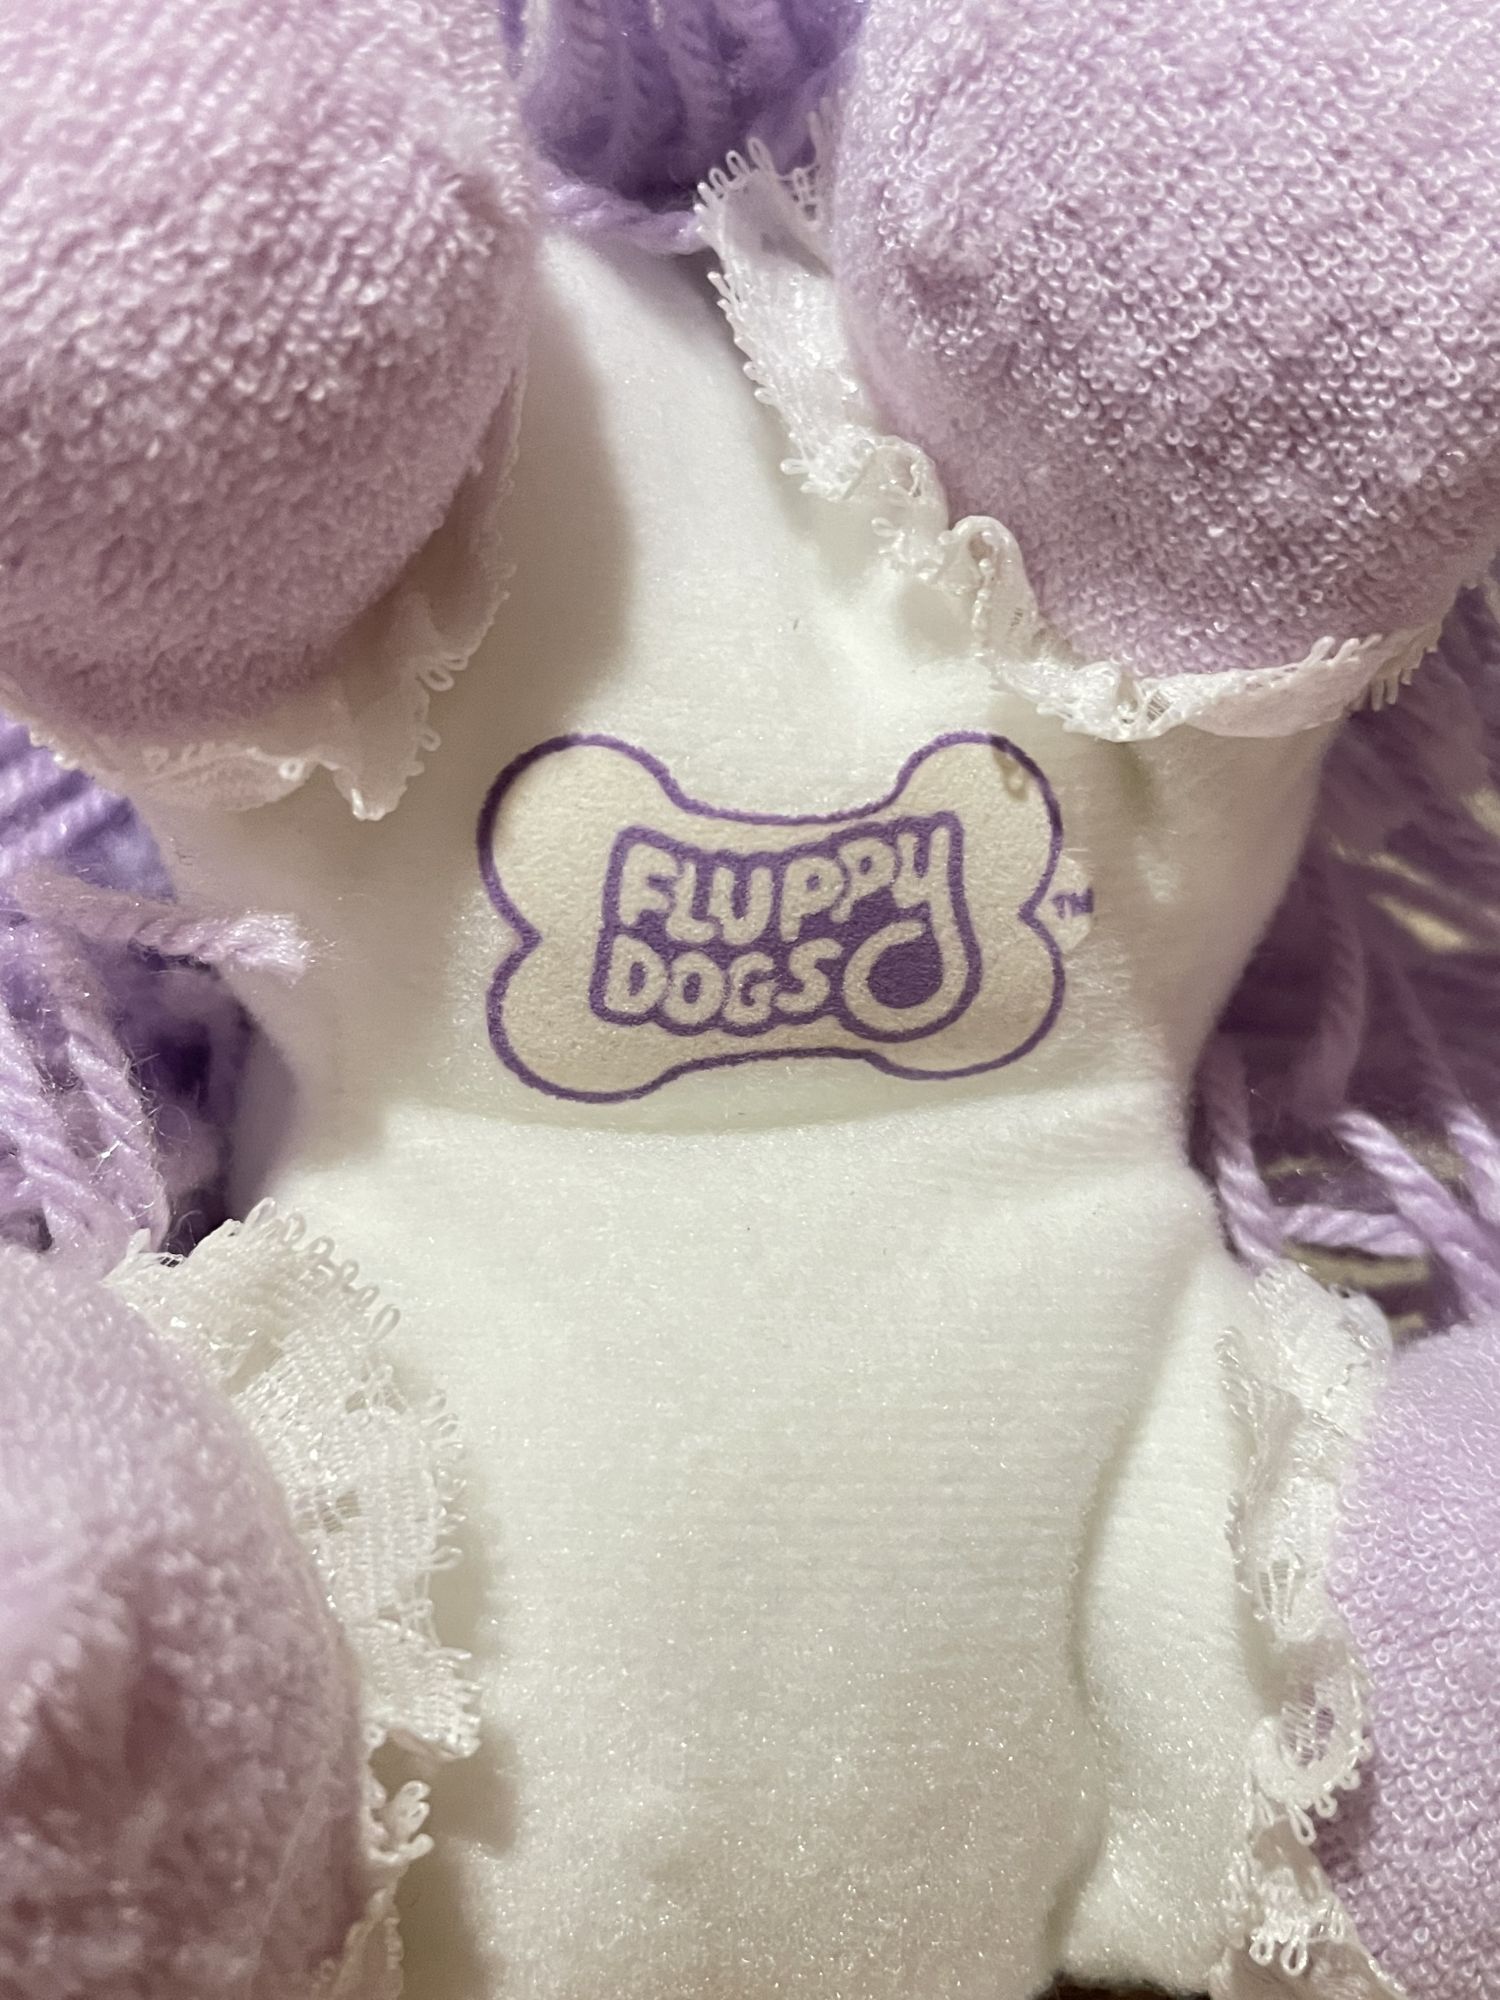 Fluppy Dogs Puppies/Plush(80s/Tickle-Pup) - 2000toys高円寺店